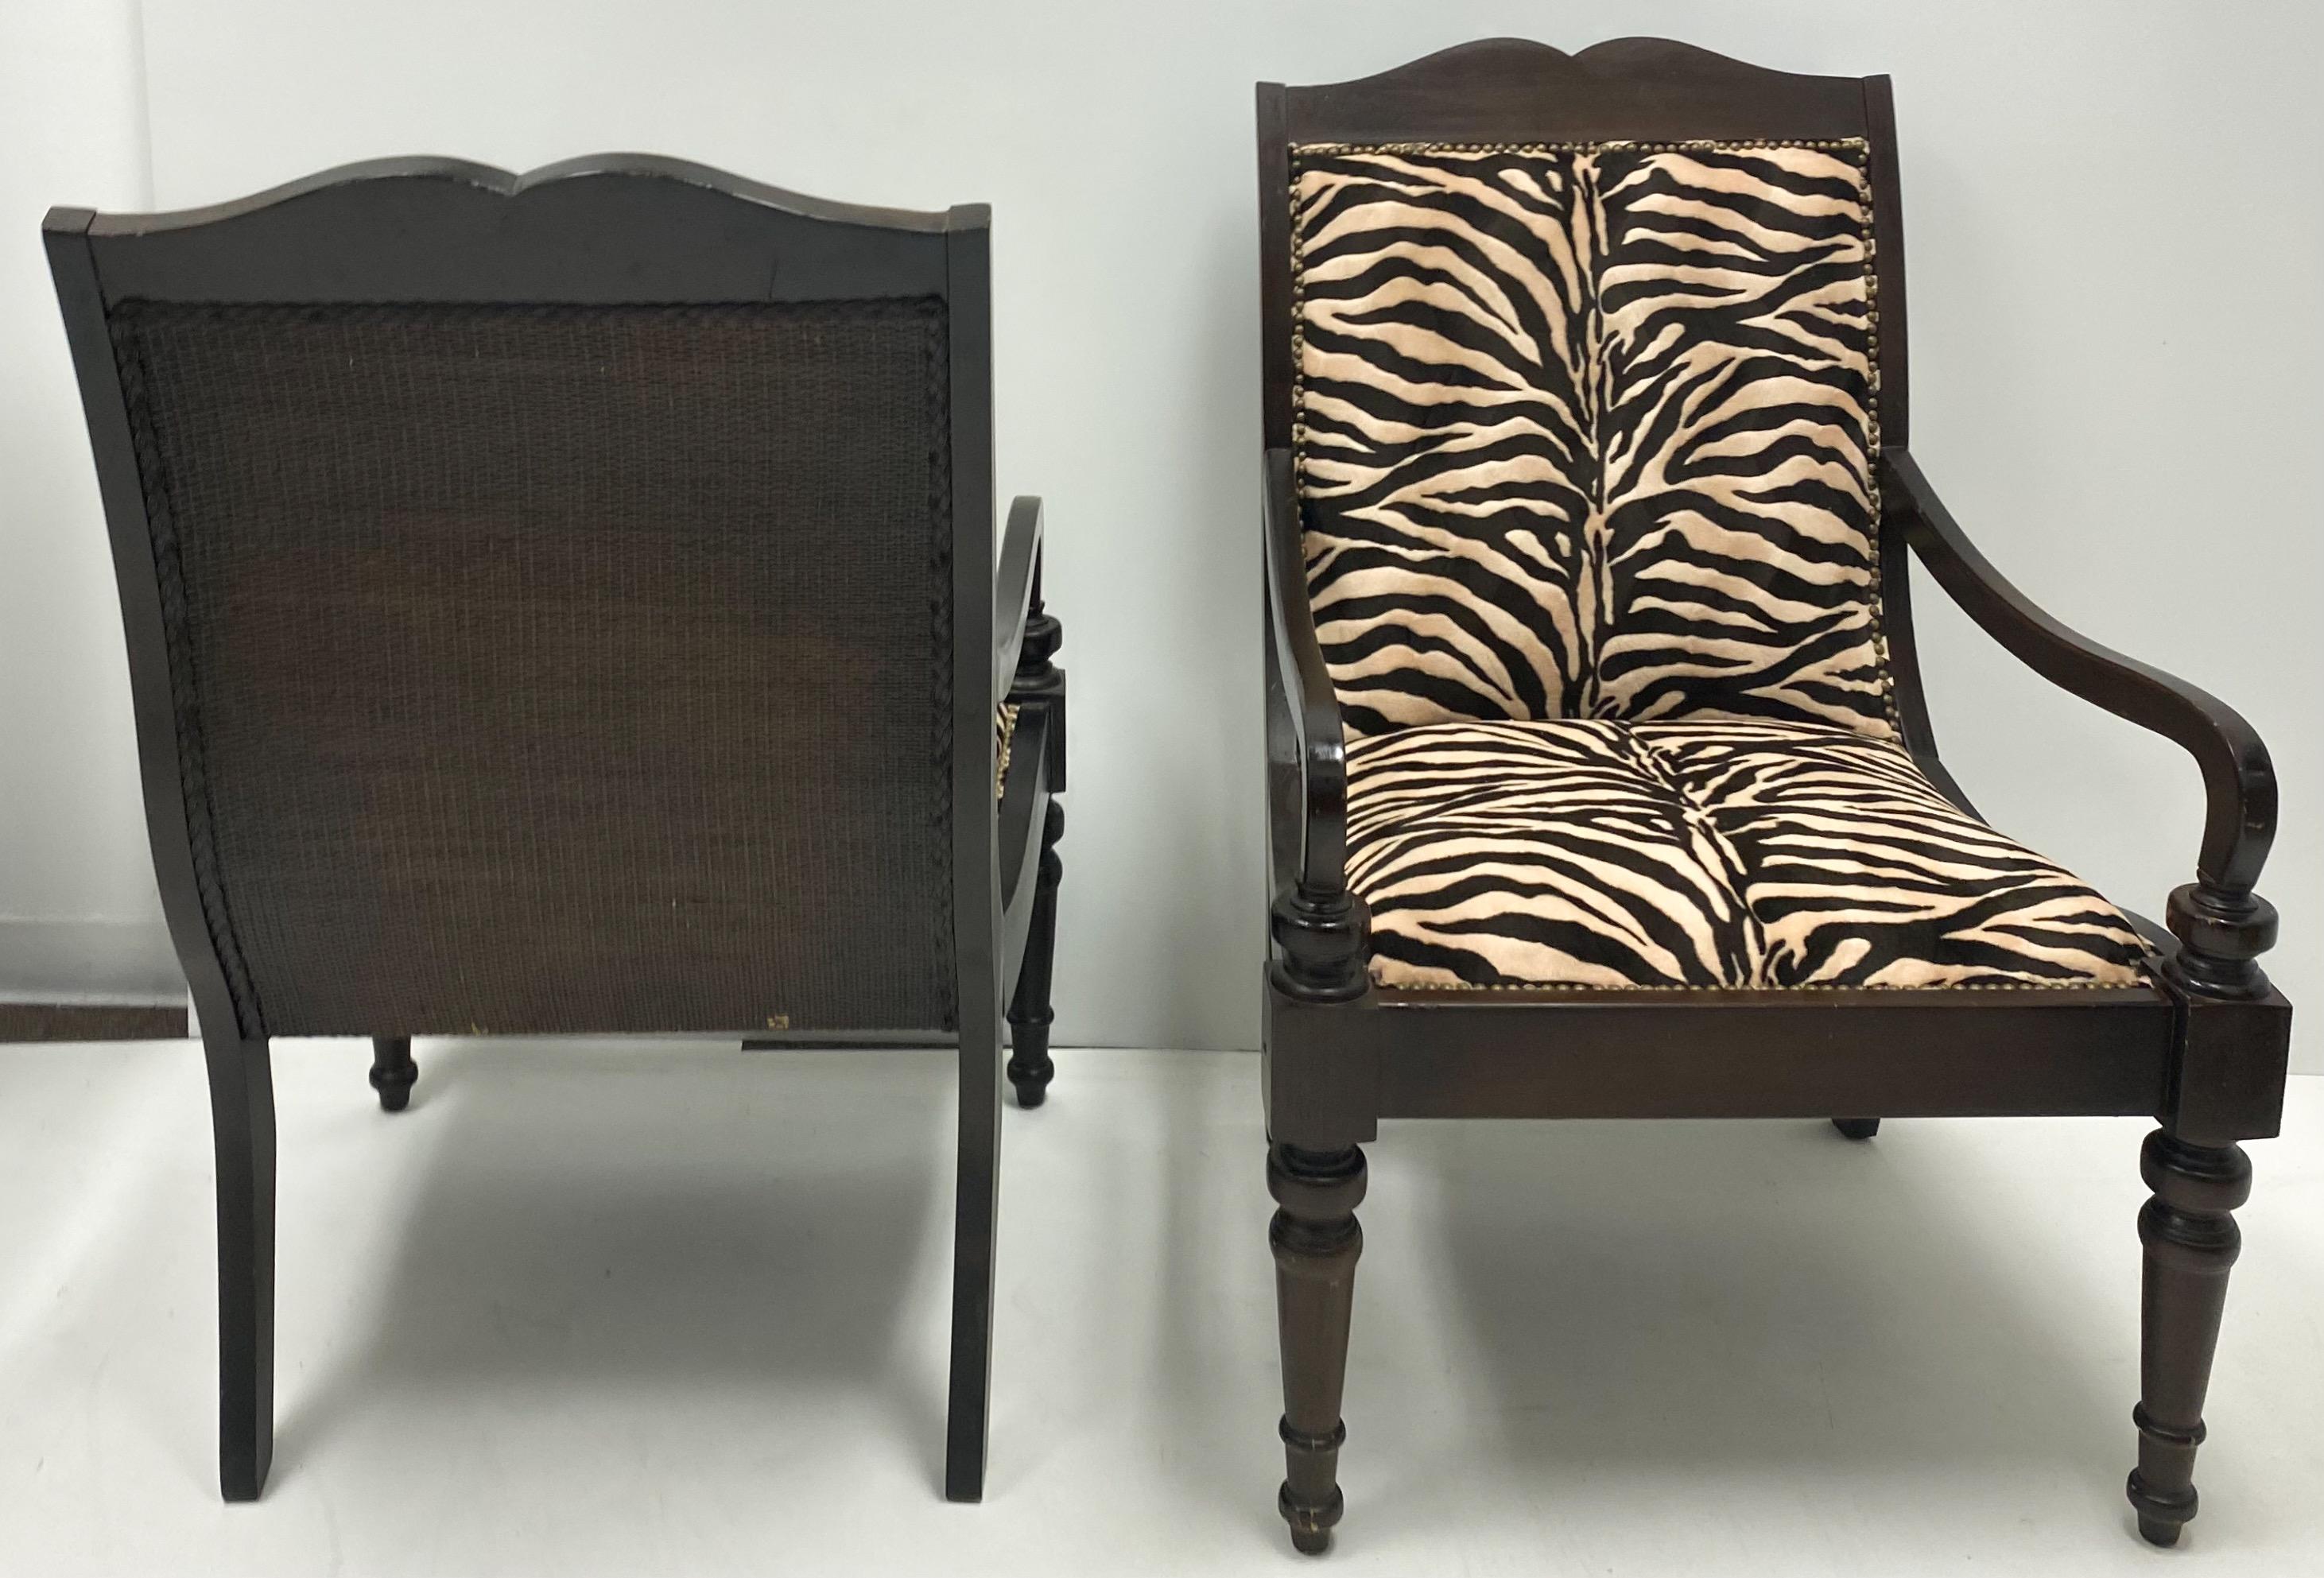 These make a strong statement! This is a pair of British Colonial style chairs in a printed zebra velvet. Brass nailheads add a finishing touch. They are marked and in very good condition.